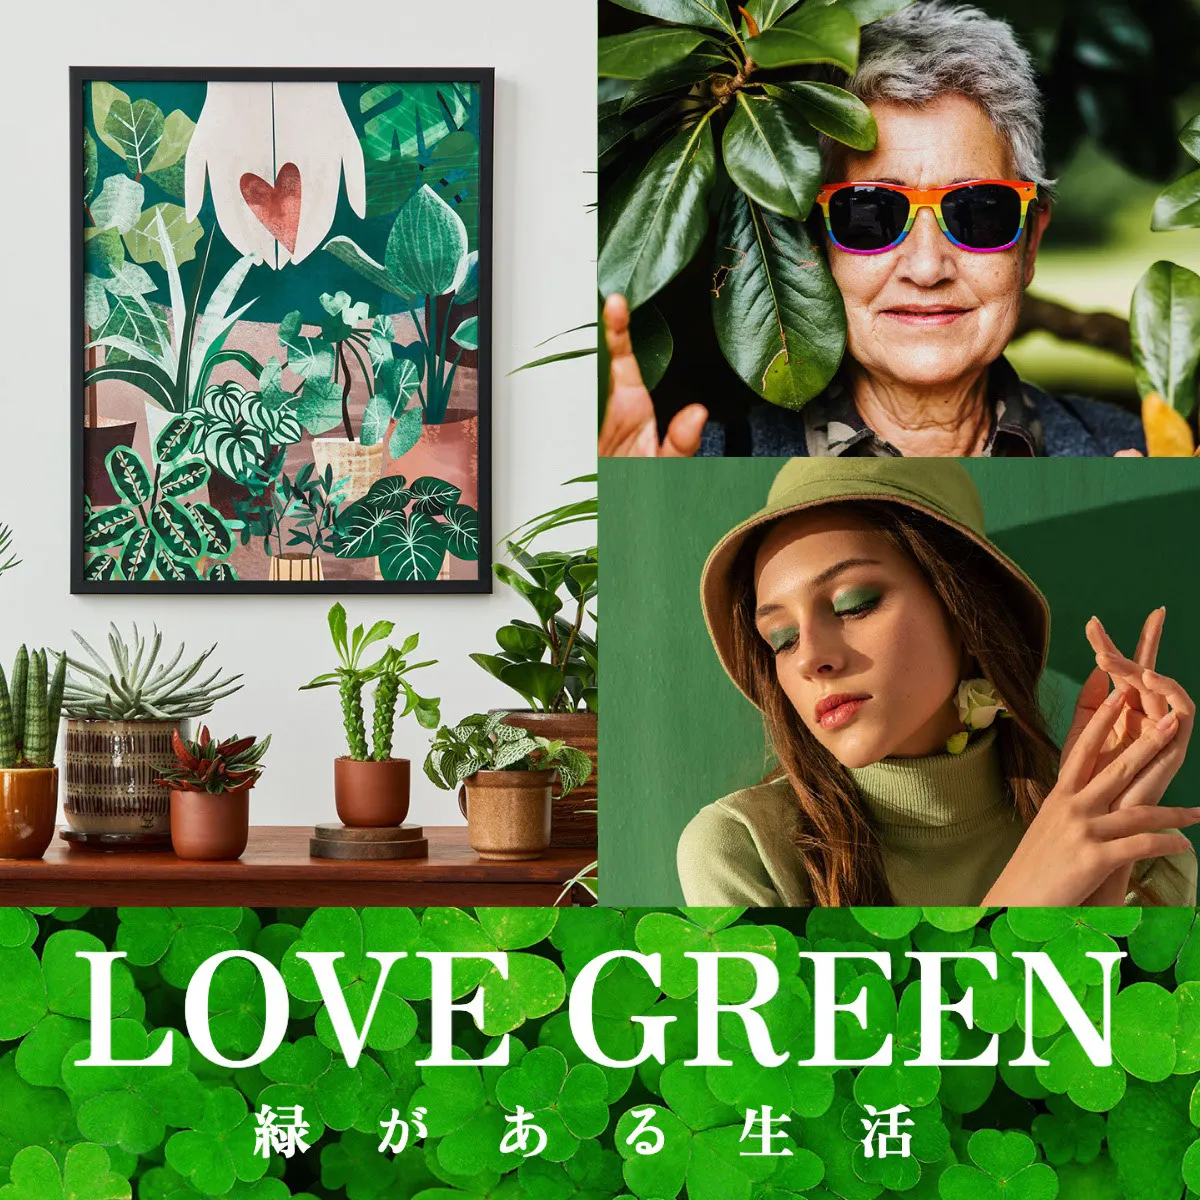 LOVE Green Combine Images Instagram square post